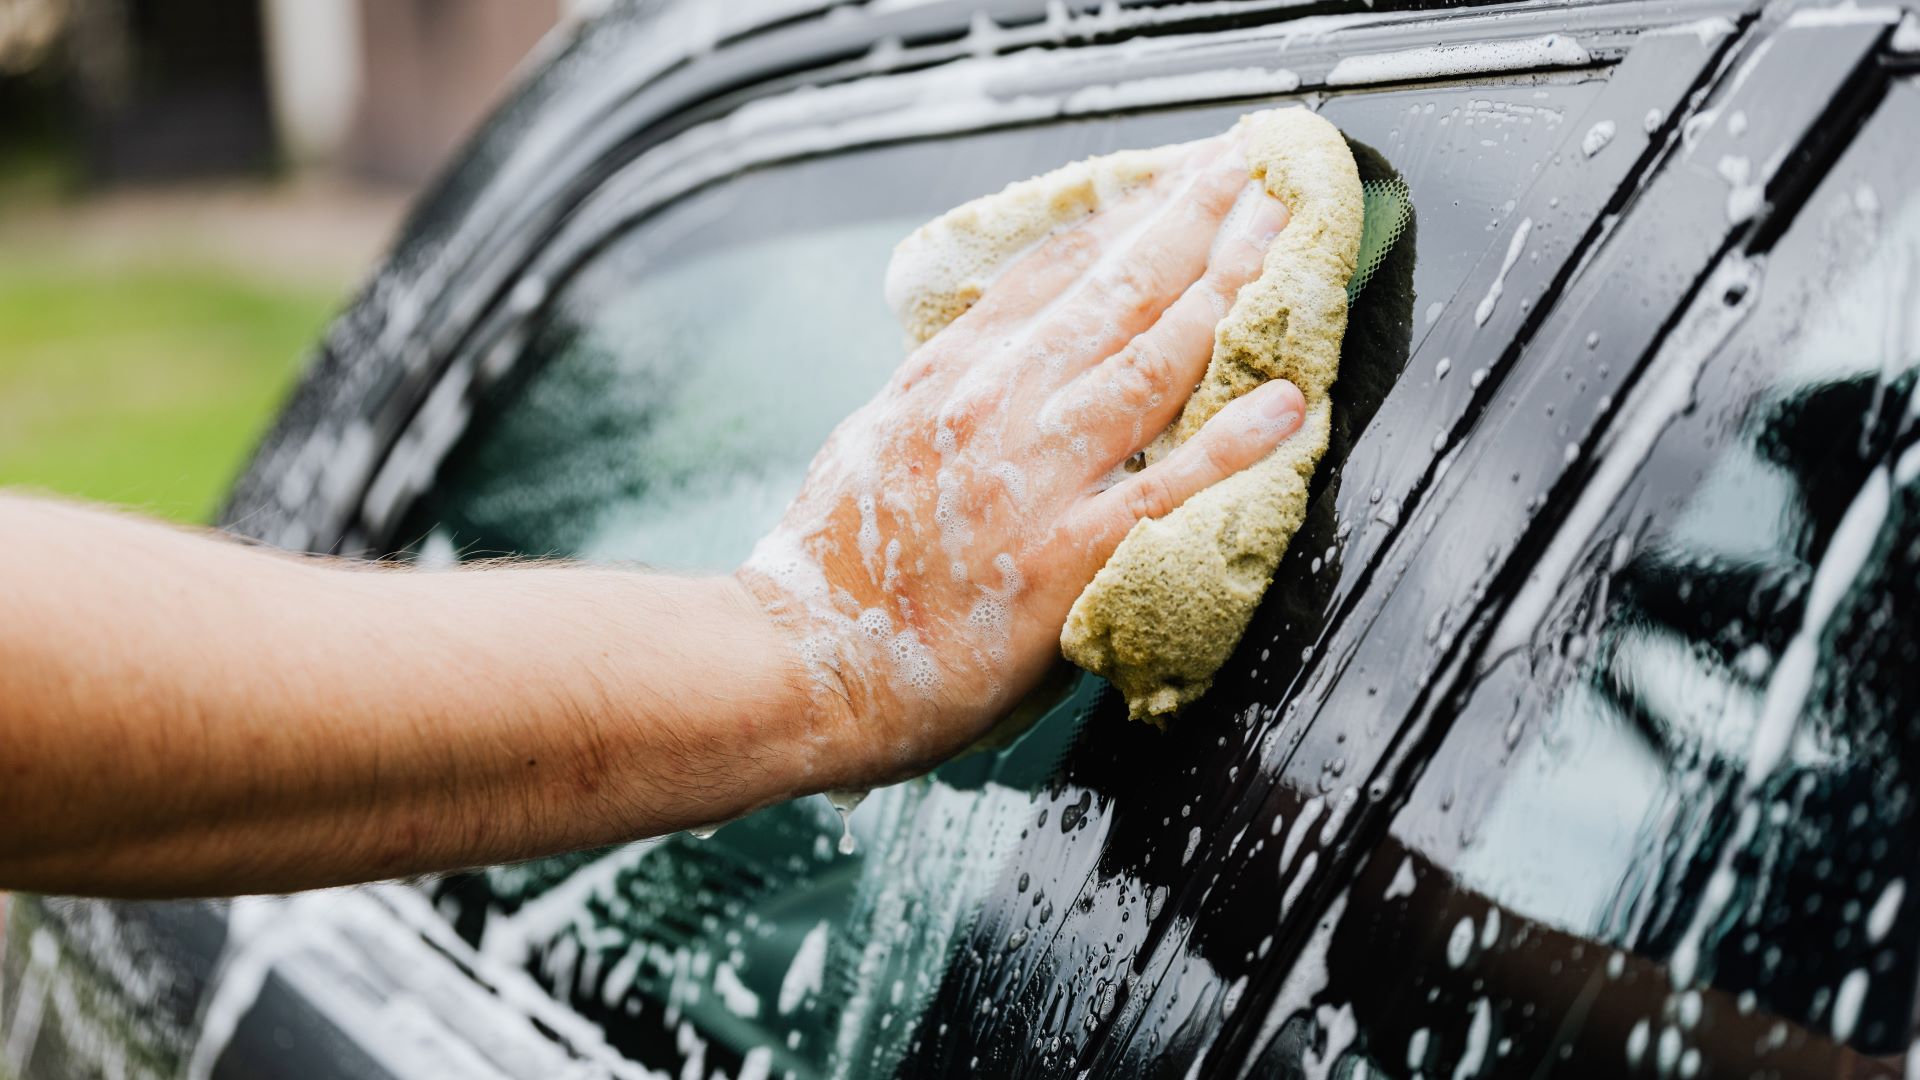 Four Strong Home: Shiny Car Mobile Auto Detailing. We come to you and make that car shine!